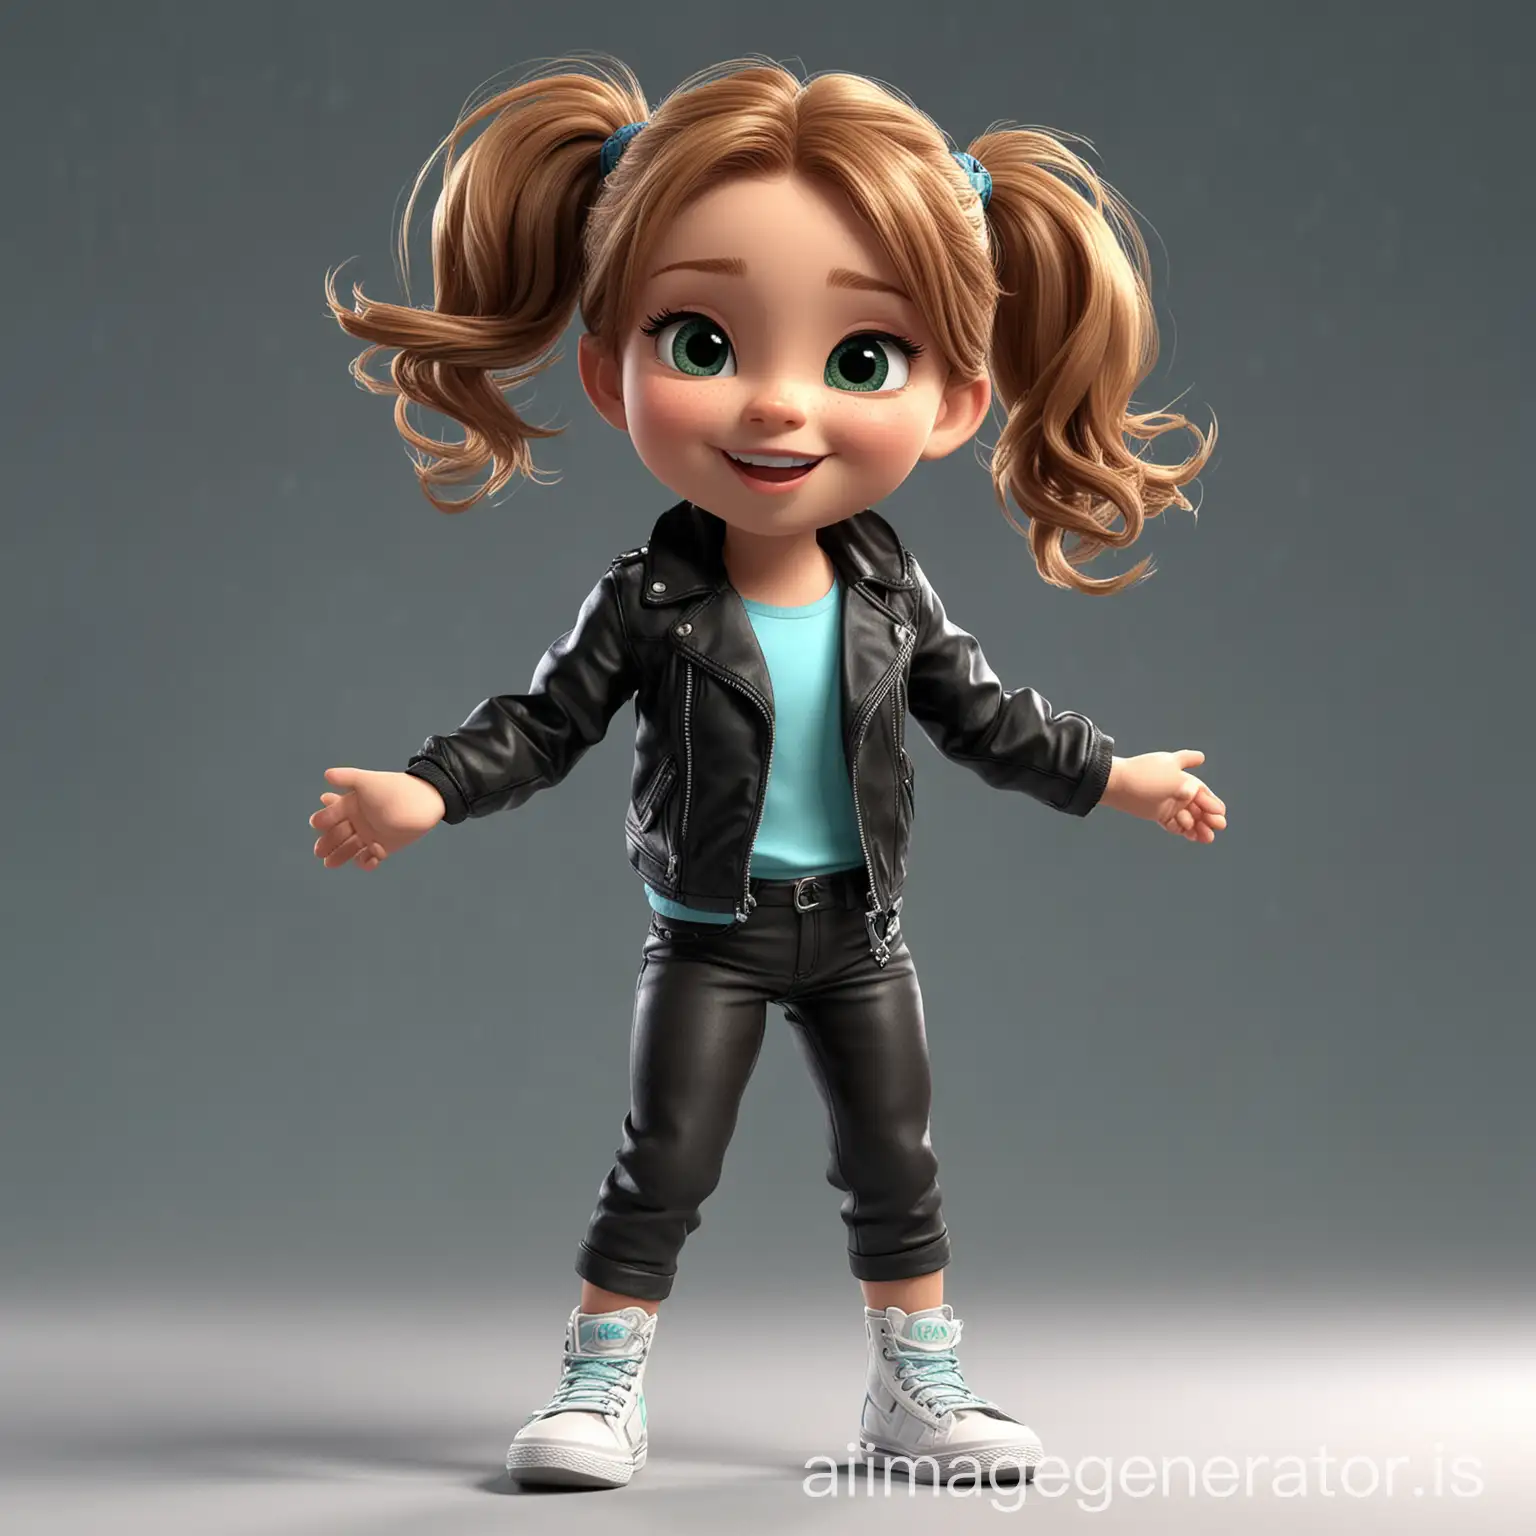 ANIMATION OF A 3D LITTLE GIRL WITH LIGHT BROWN HAIR AND TWO PONYTAILS DANCING ON A STAGE. THE GIRL LIKES LIGHT BLUE, Light GREEN and BLACK COLORS. SHE IS WINKING AN EYE. HER CLOTHING STYLE IS SIMILAR TO SINGER LUA LIP AND SHE WEARS A LEATHER JACKET AND PANTS. THE GIRL IS SEEN DANCING ON STAGE. THE GIRL IS 8 YEARS OLD AND WEARS PANTS. IT'S A 8 YEAR OLD GIRL AND THE SHOT IS FULL BODY. She has a face of happiness